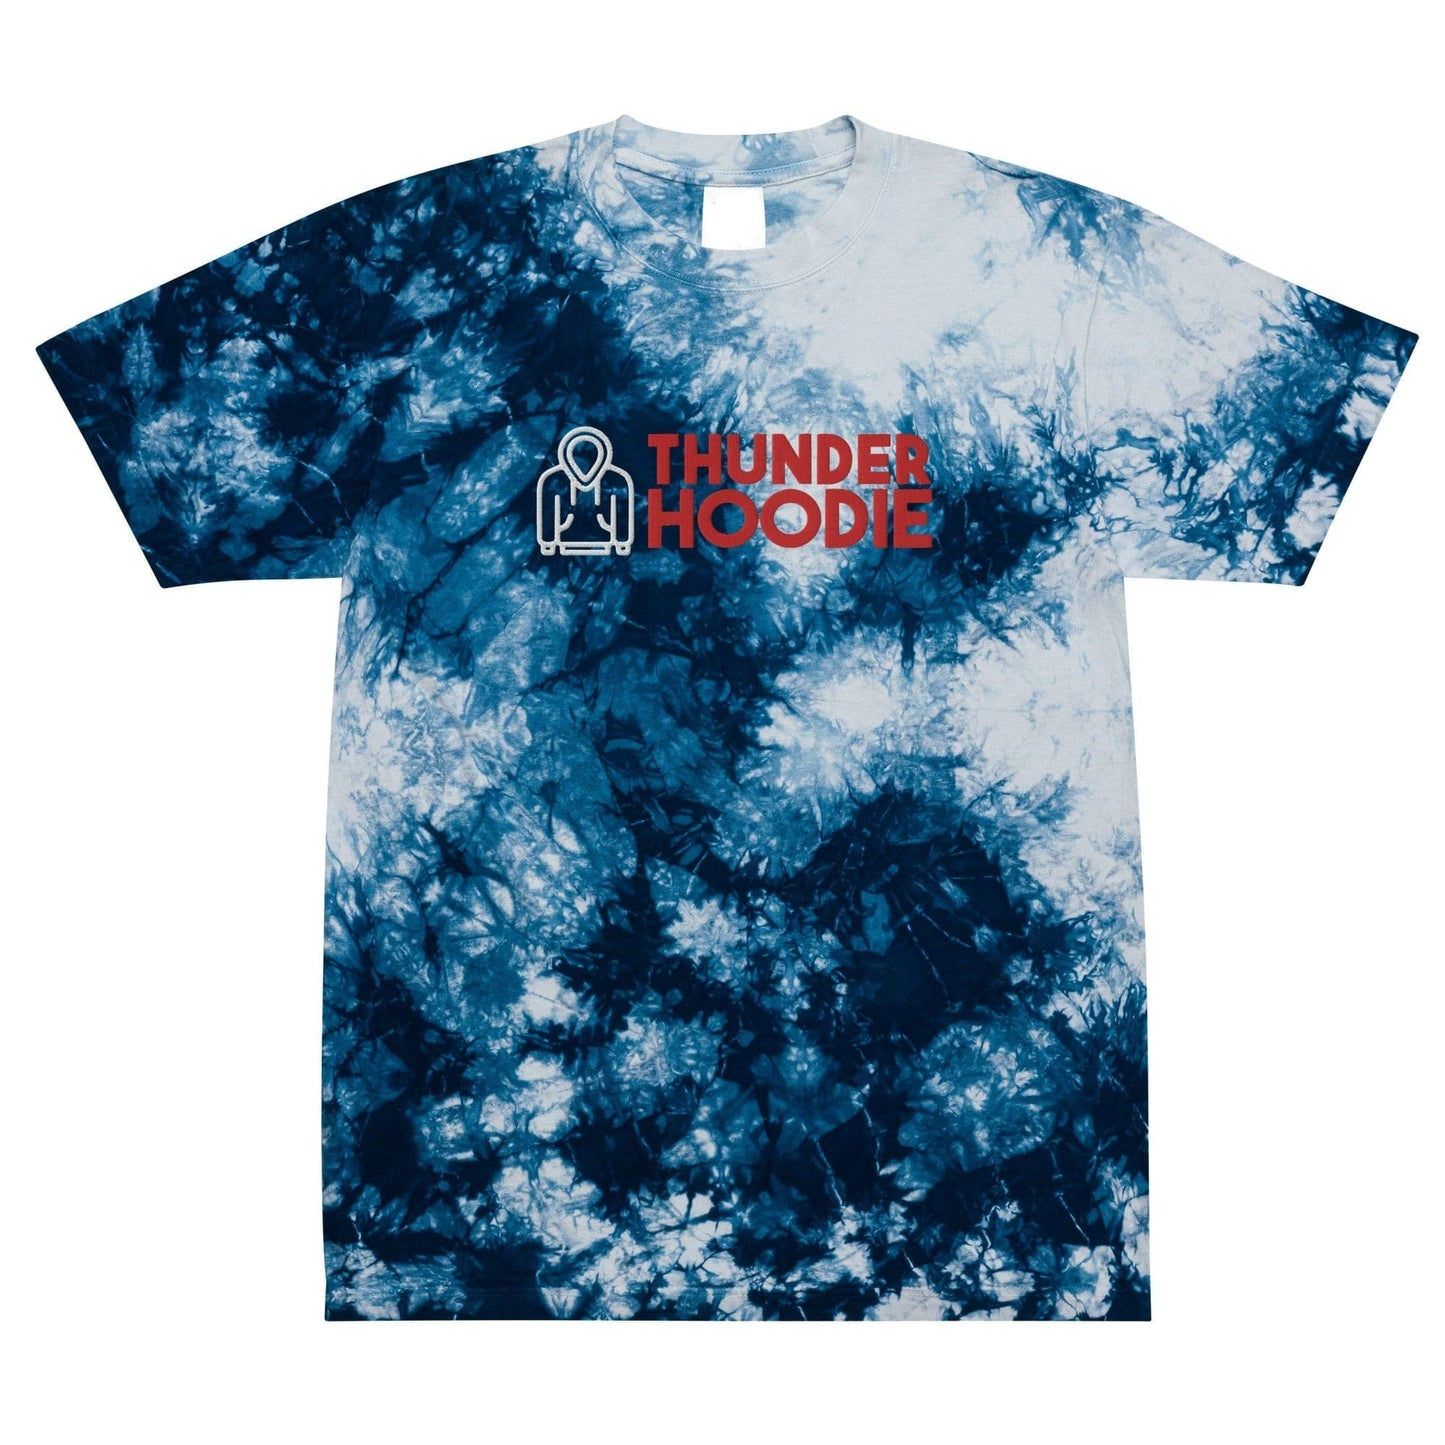 Embroidered oversized tie-dye t-shirt